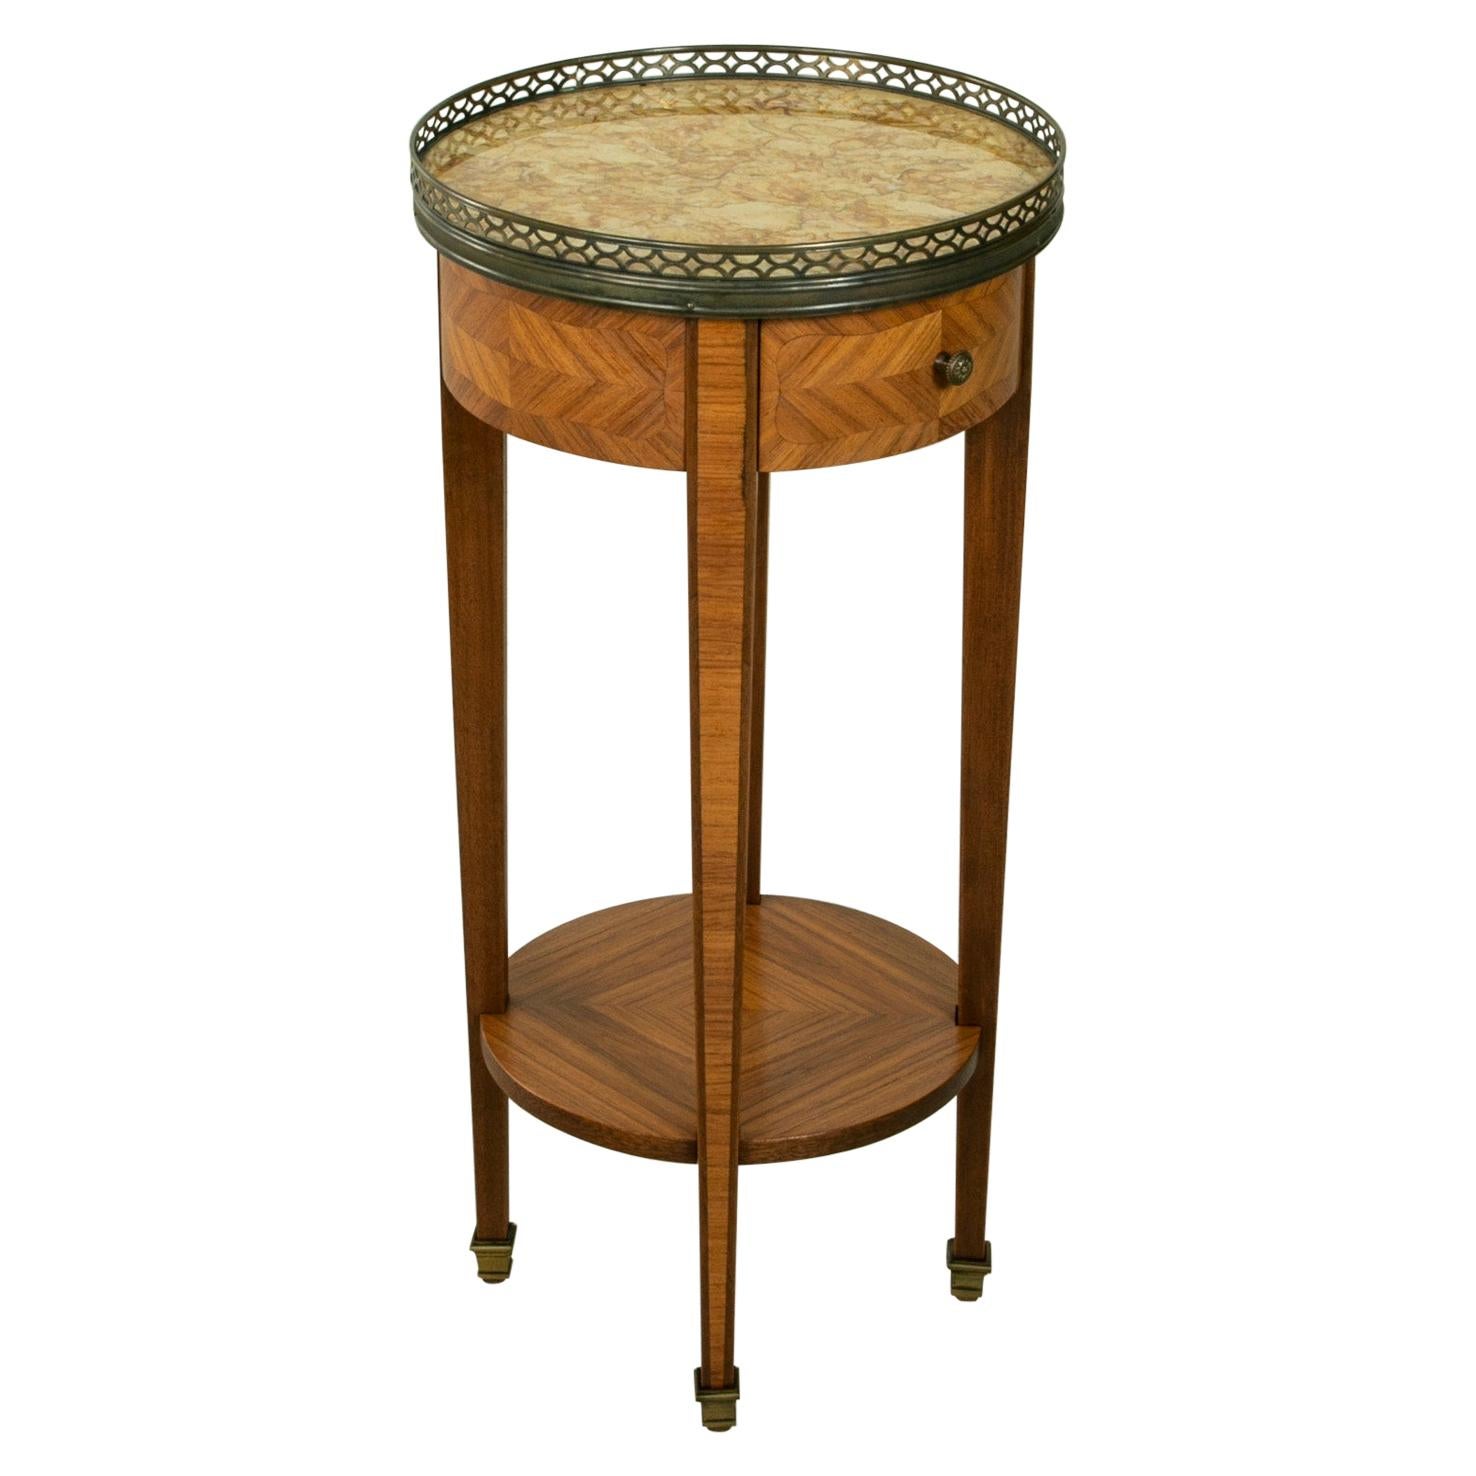 Early 20th Century French Louis XVI Style Rosewood Marquetry Side Table, Marble